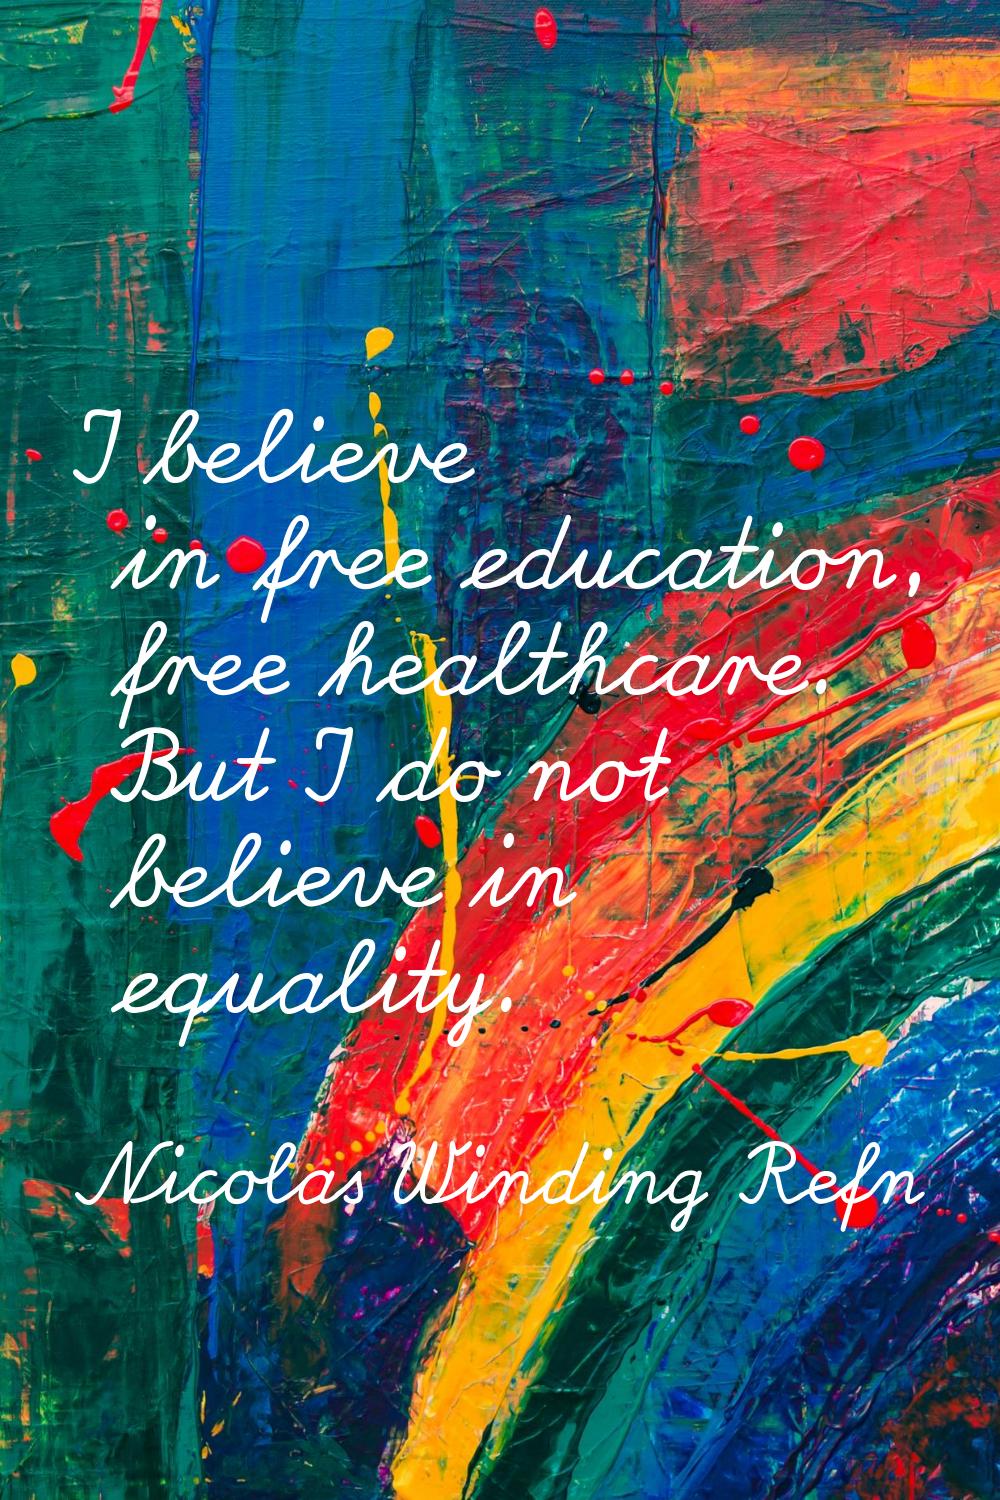 I believe in free education, free healthcare. But I do not believe in equality.